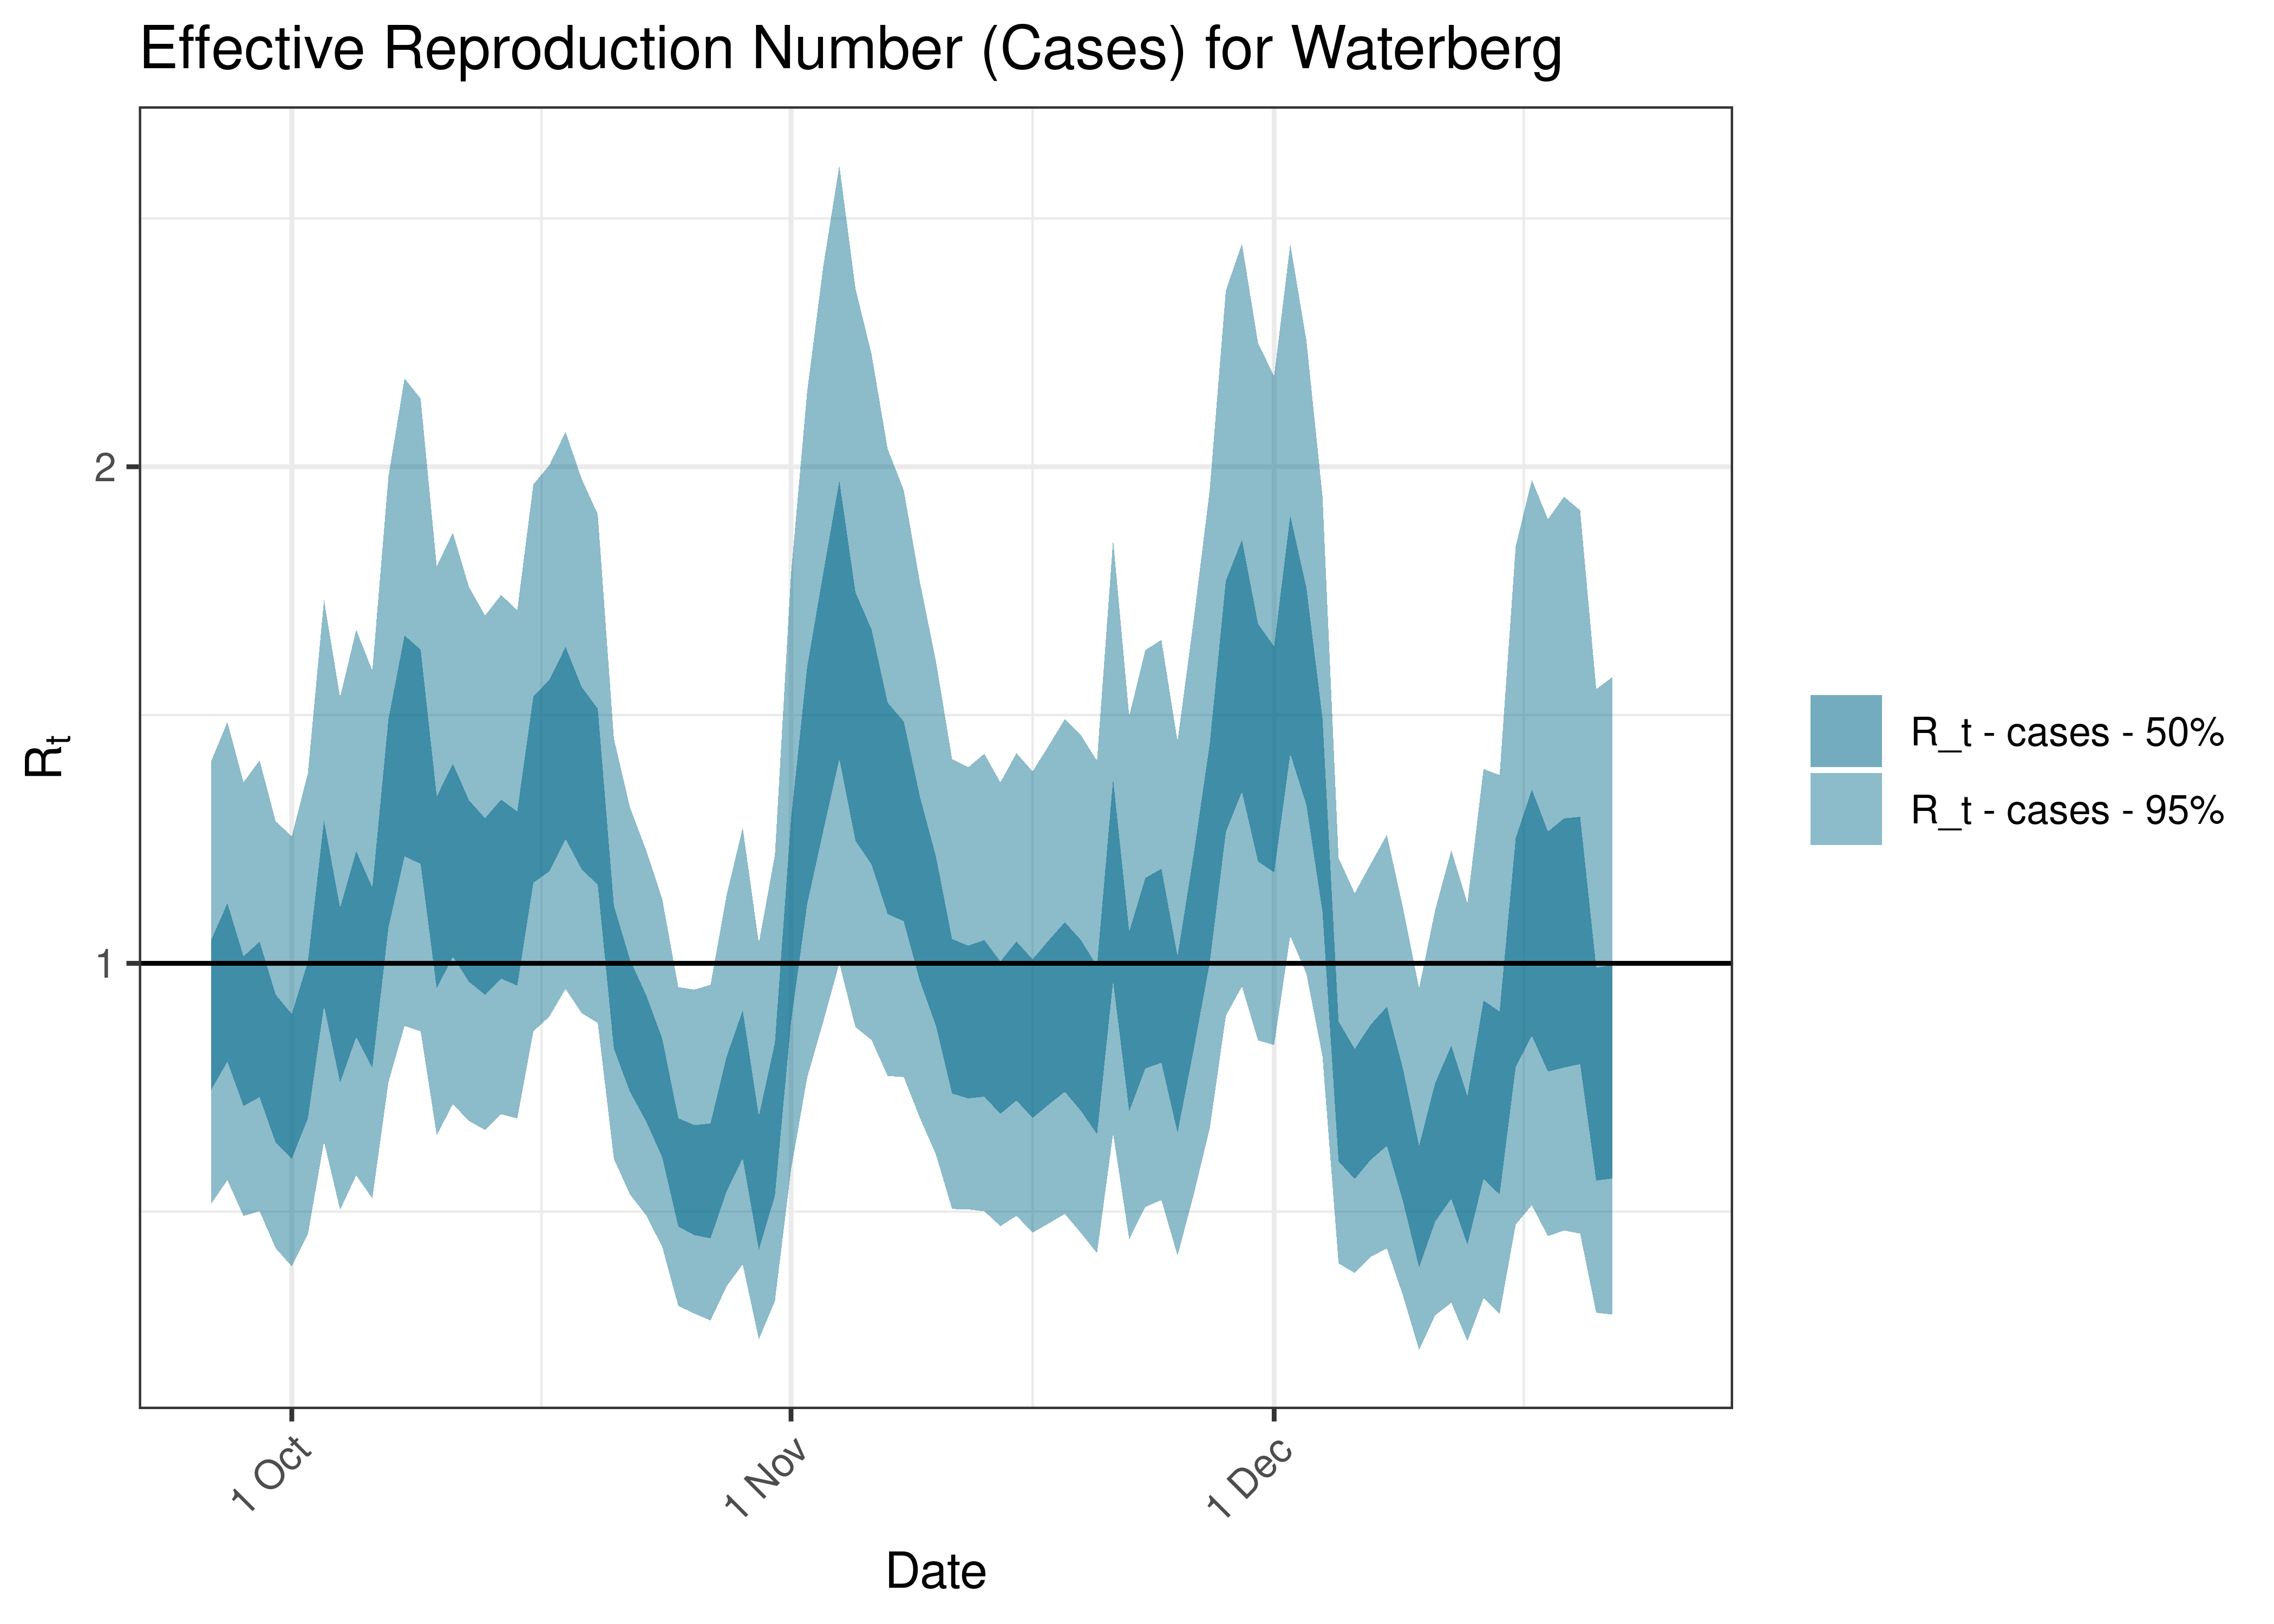 Estimated Effective Reproduction Number Based on Cases for Waterberg over last 90 days